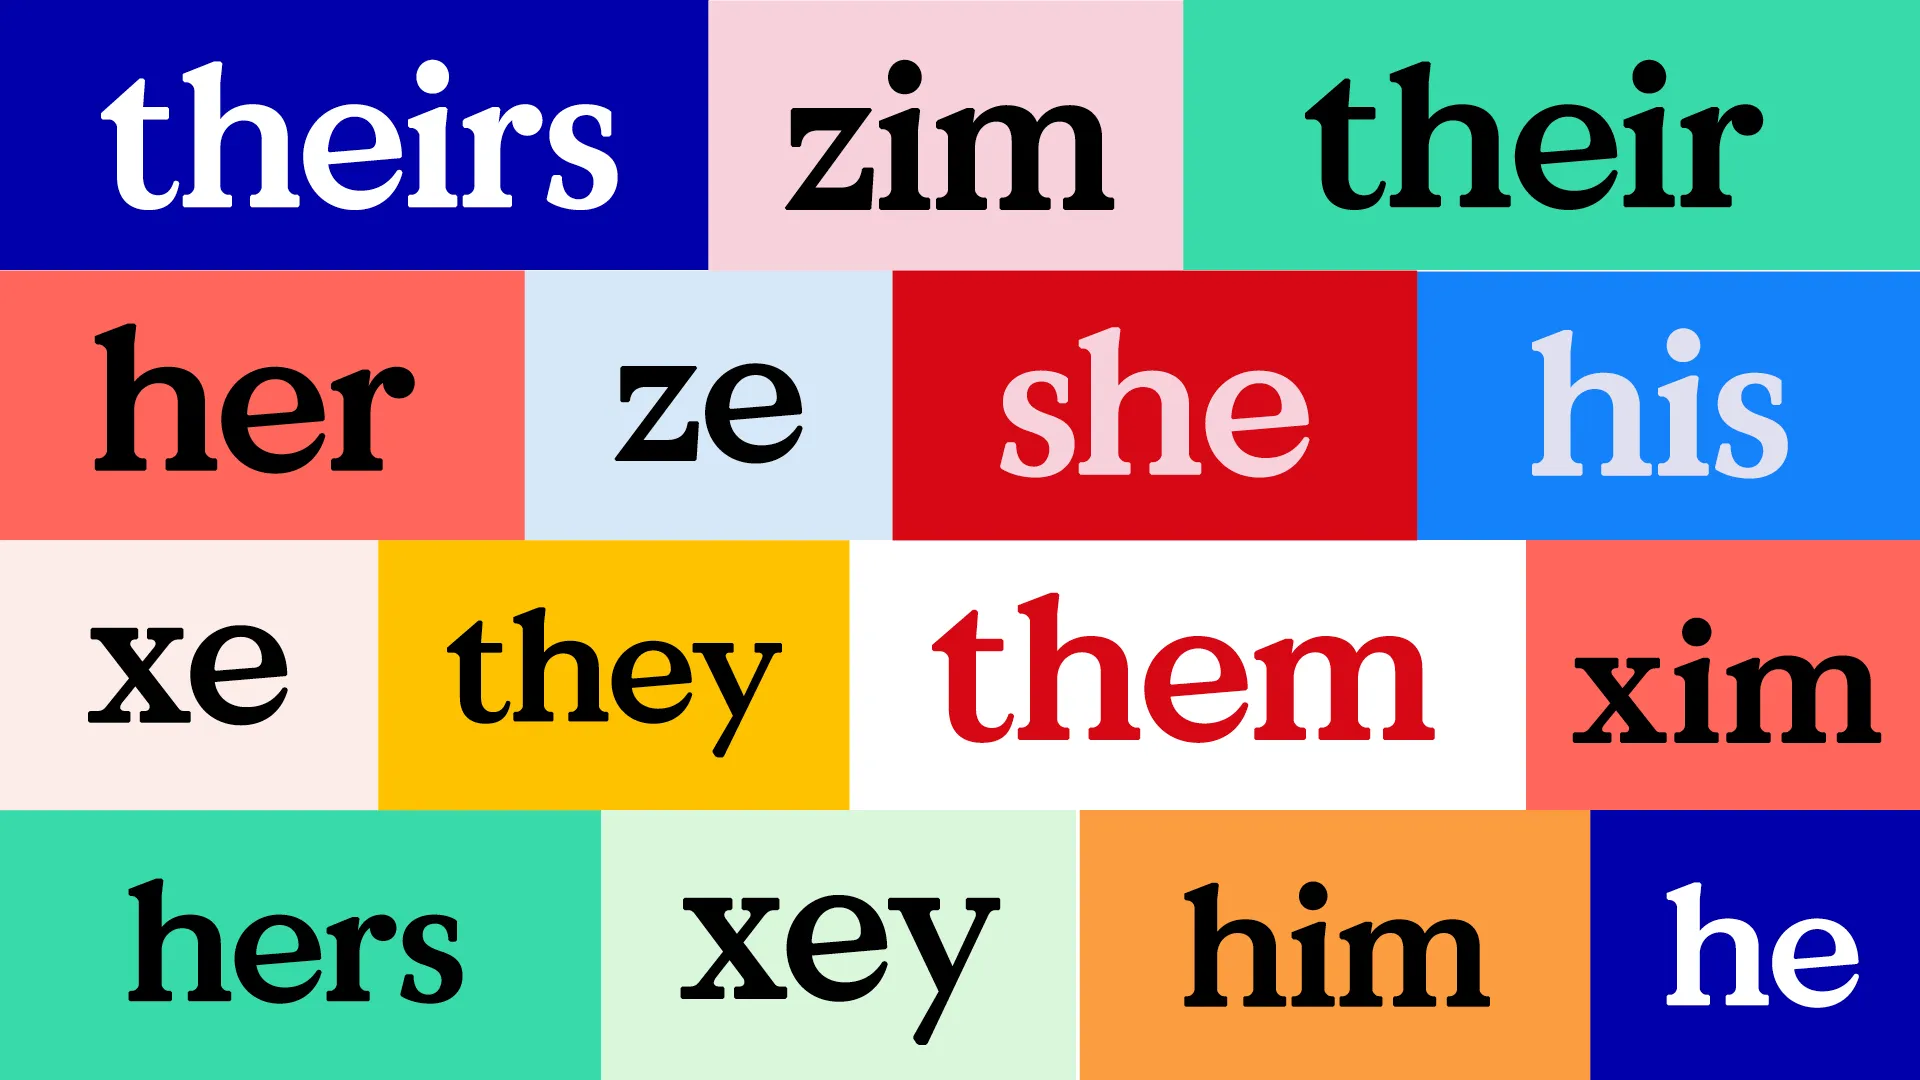 Understanding Pronoun Usage In Order To Foster Inclusion And Belonging 